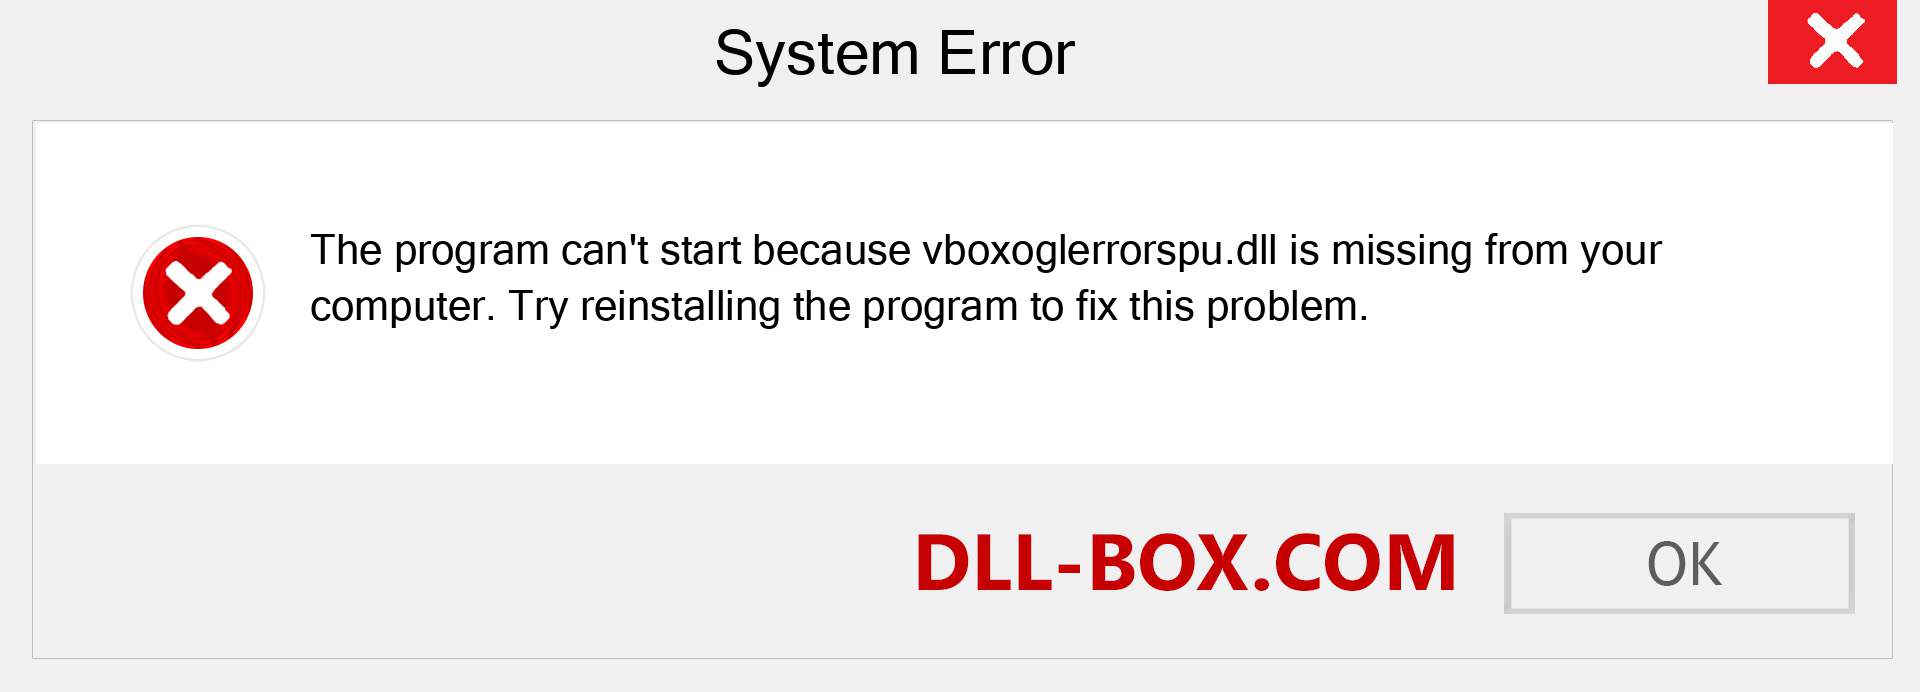  vboxoglerrorspu.dll file is missing?. Download for Windows 7, 8, 10 - Fix  vboxoglerrorspu dll Missing Error on Windows, photos, images